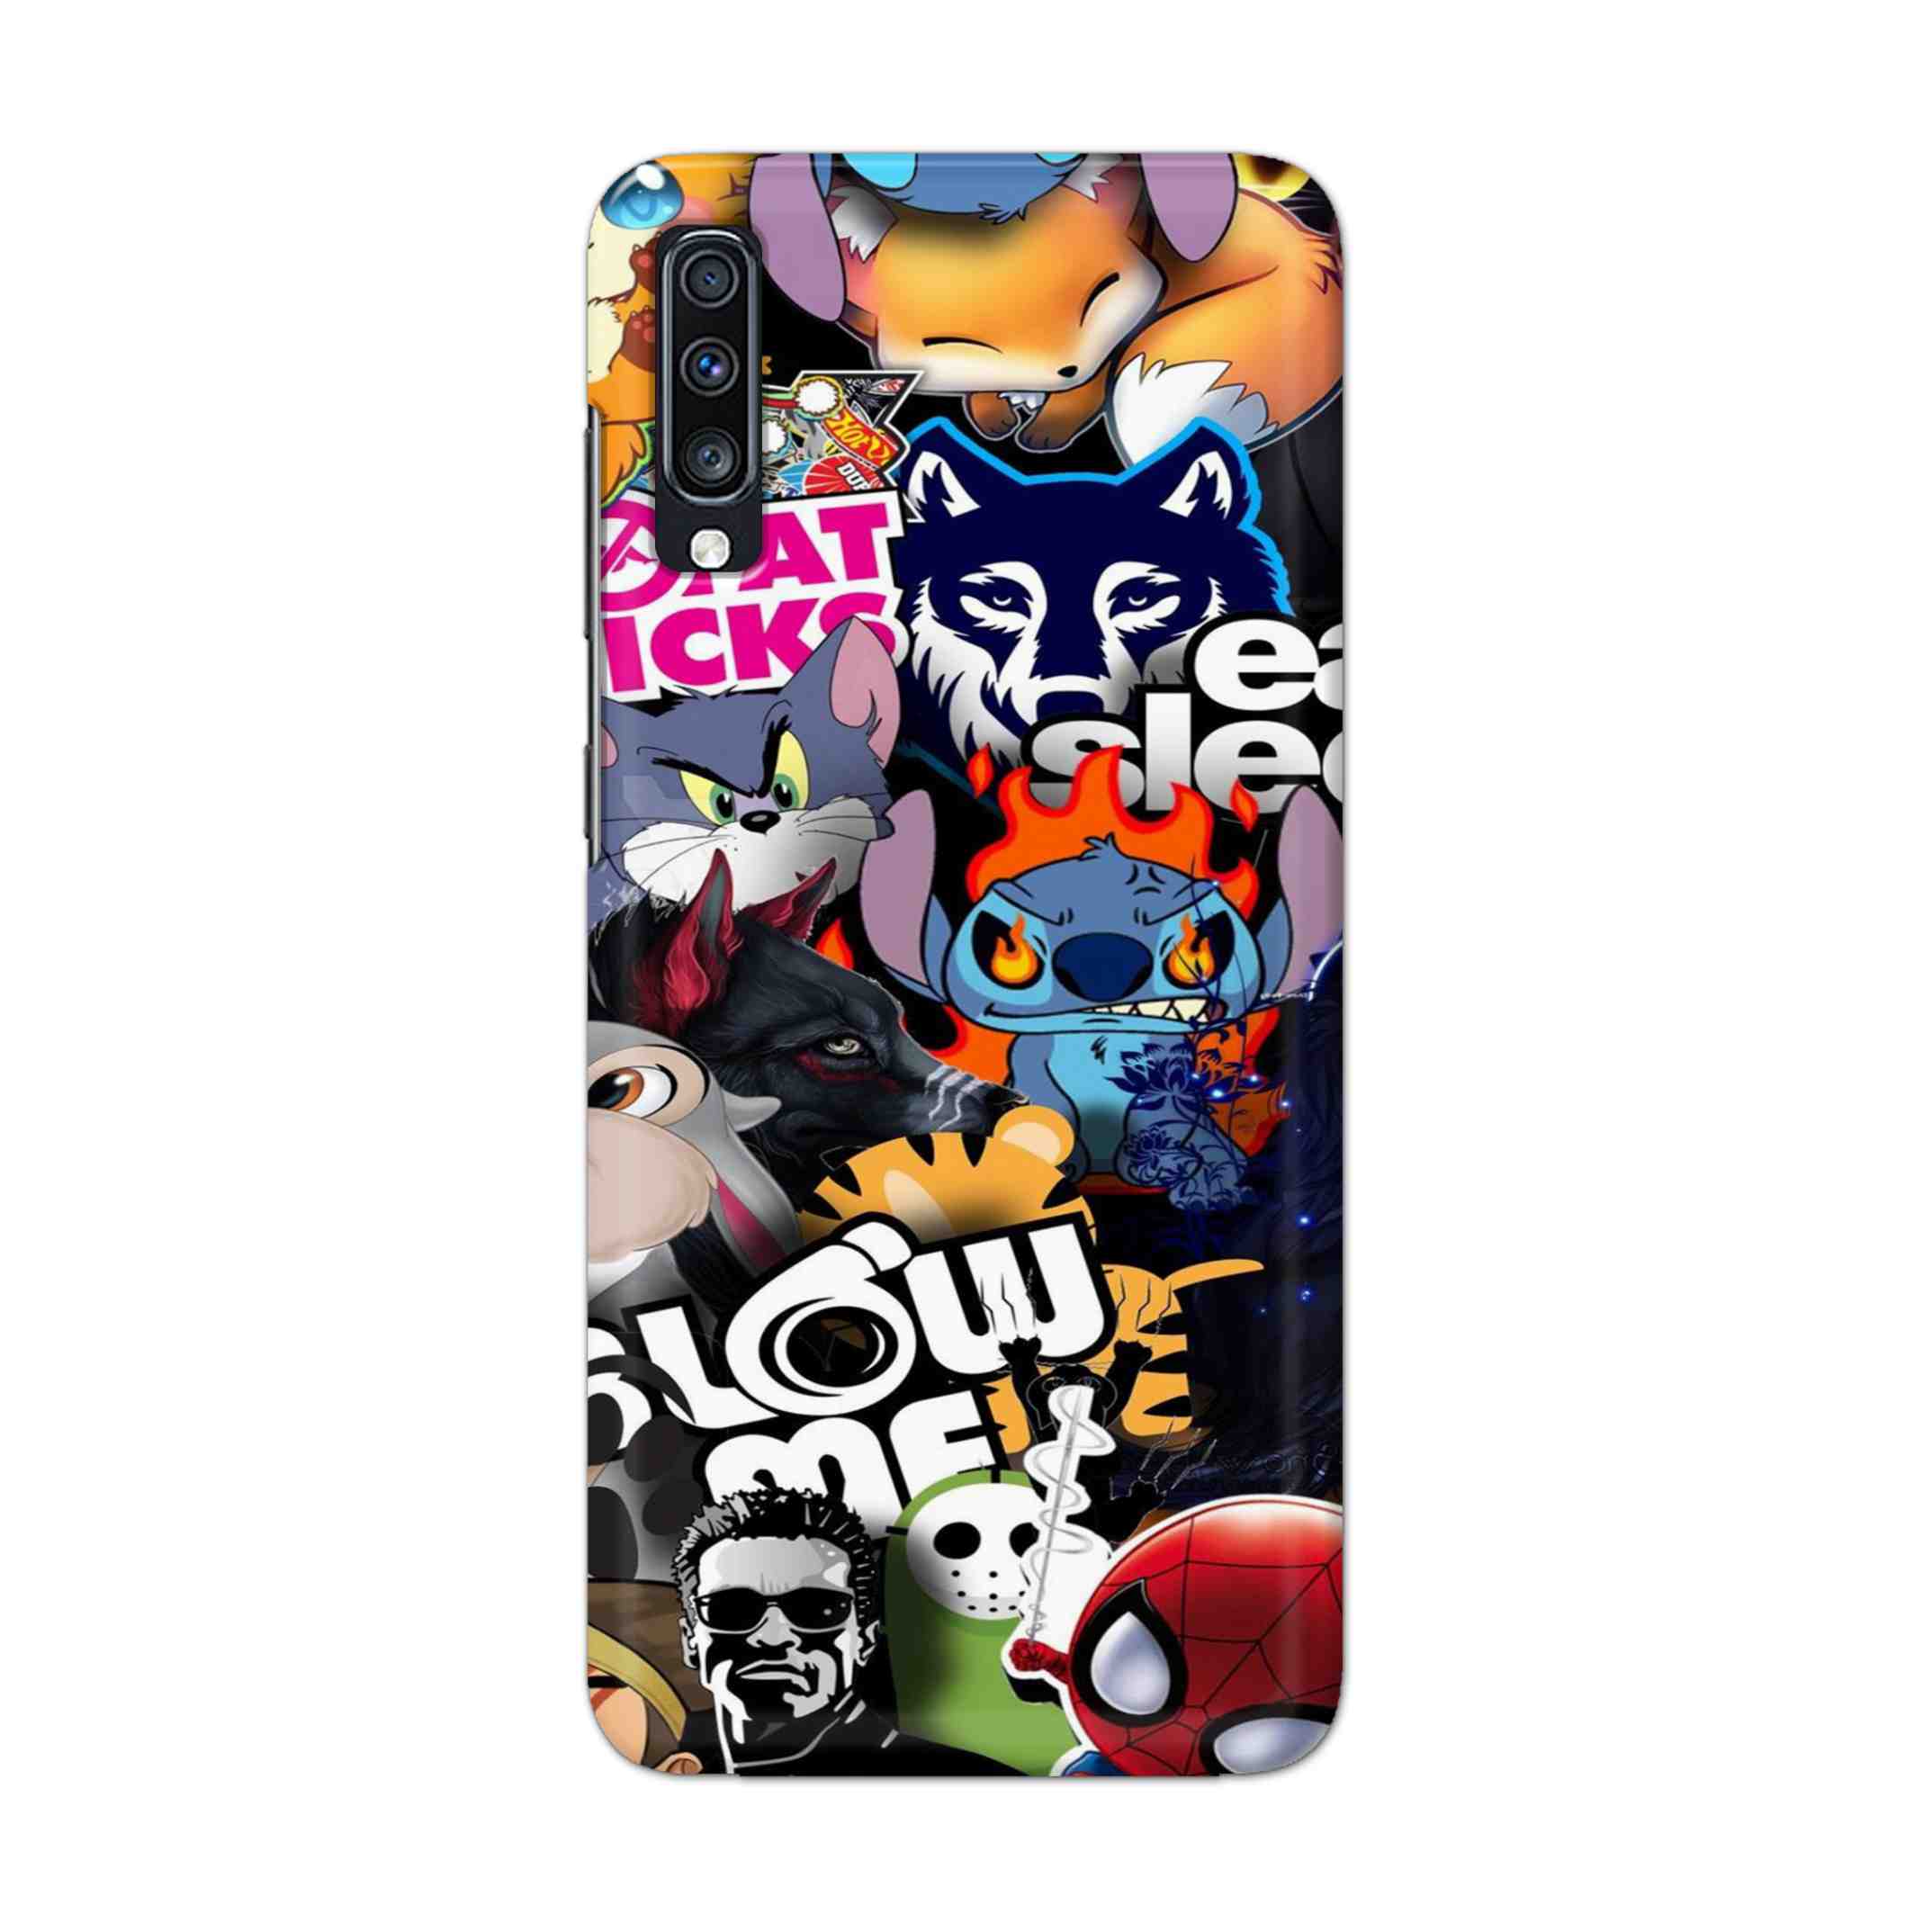 Buy Blow Me Hard Back Mobile Phone Case Cover For Samsung Galaxy A70 Online